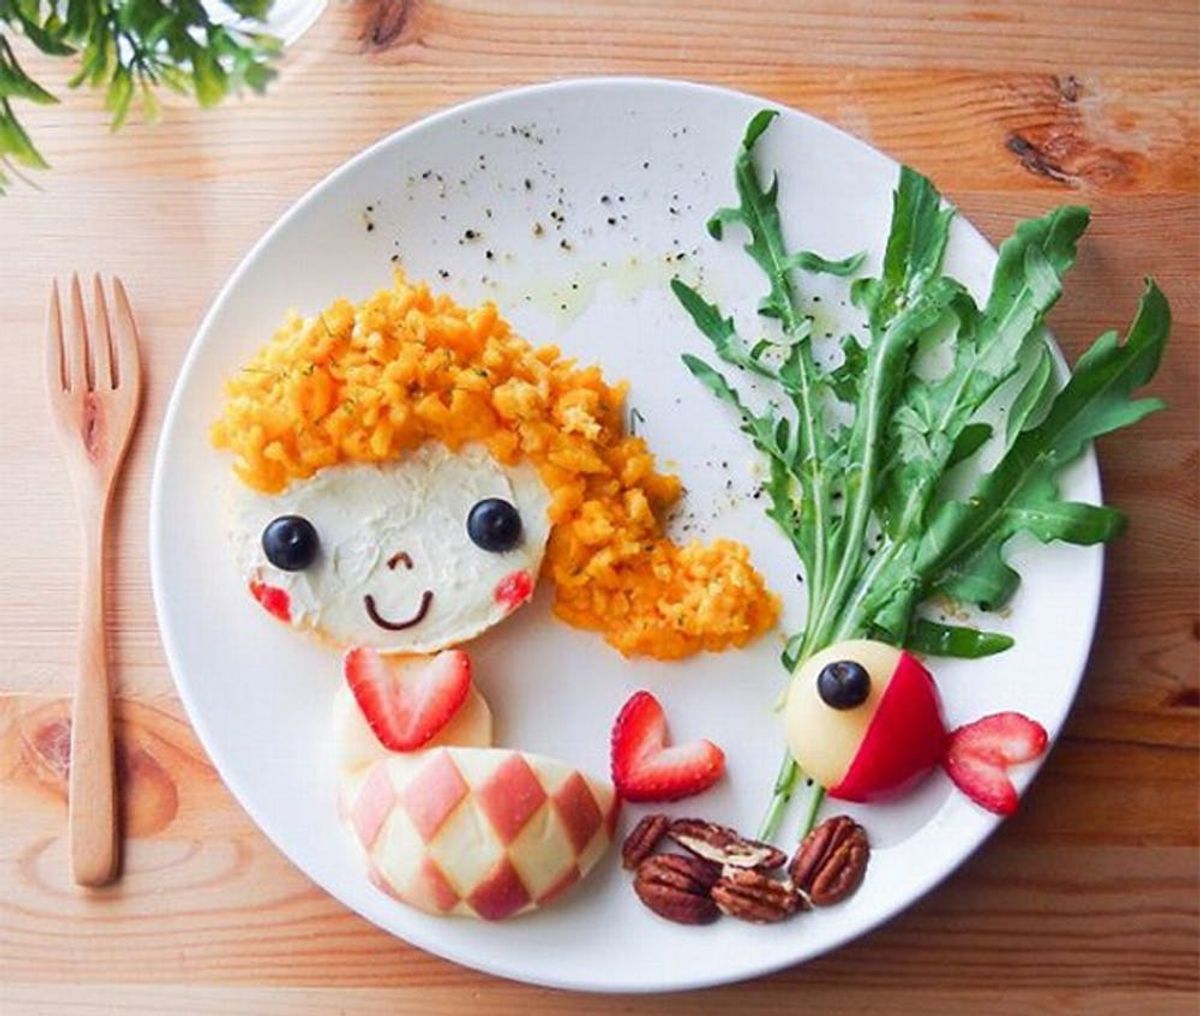 20 Creative Kids’ Lunches That Double as Art